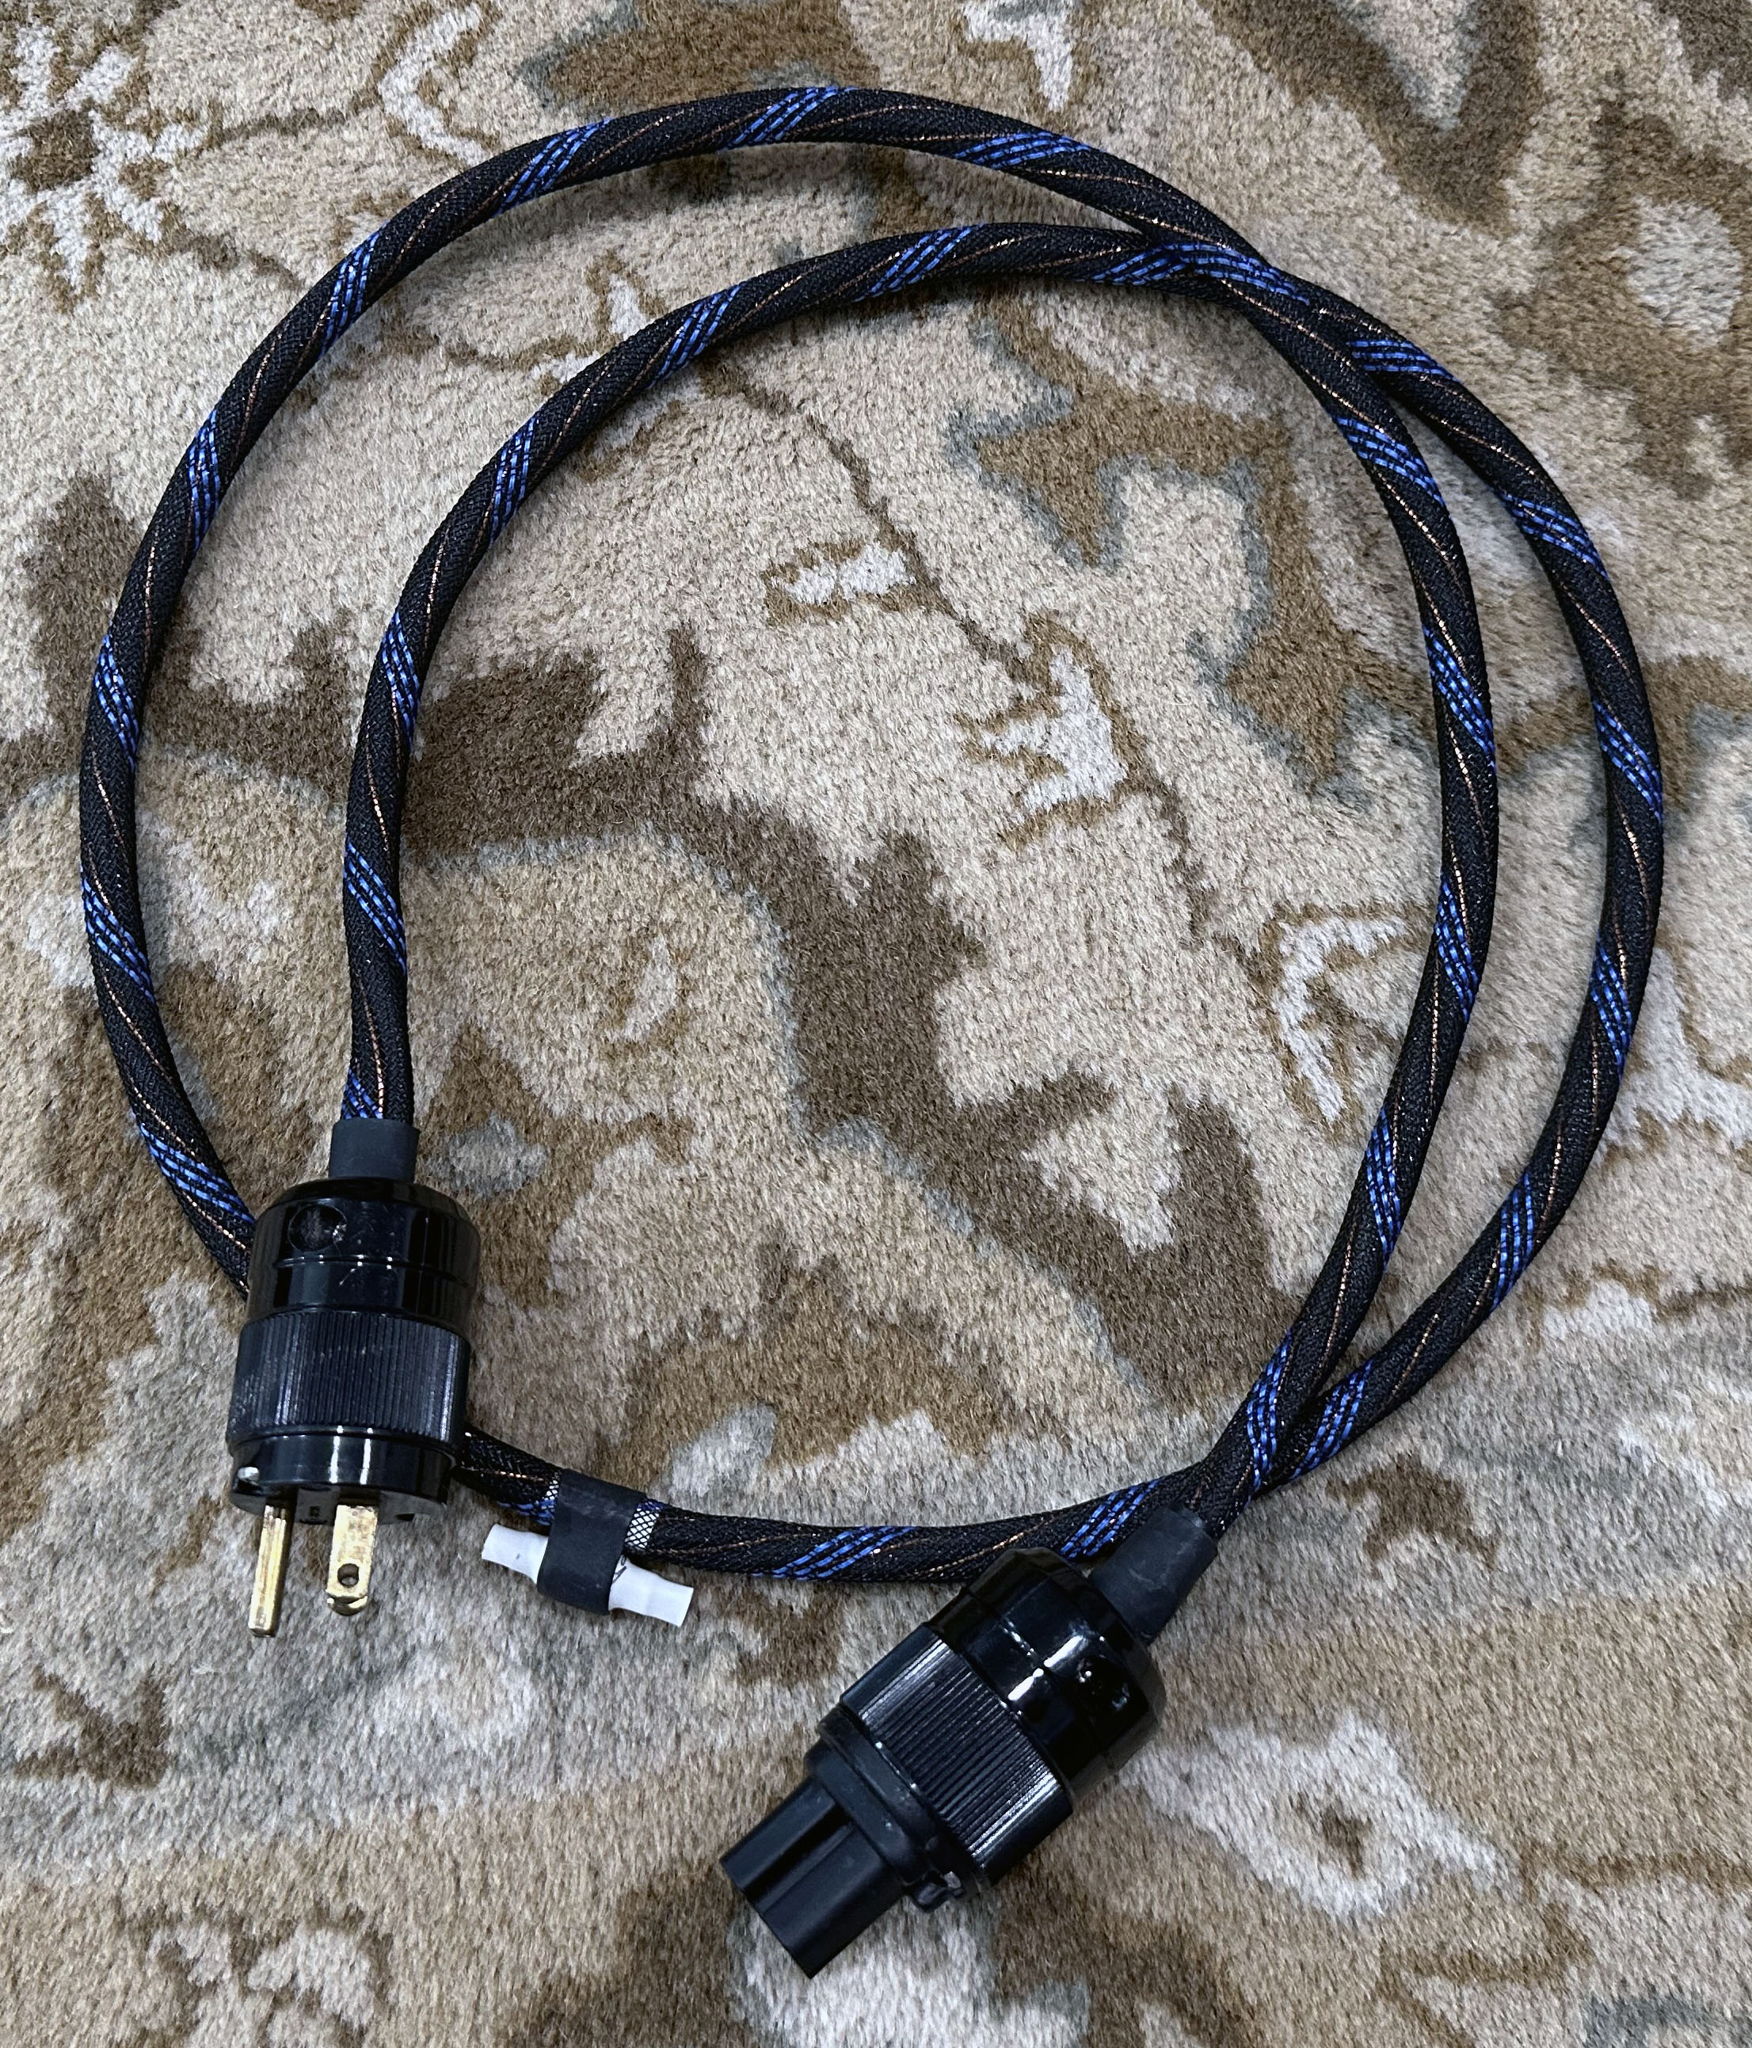 OVER 50% off on Alan Maher Designs Scorpion Power Cable...